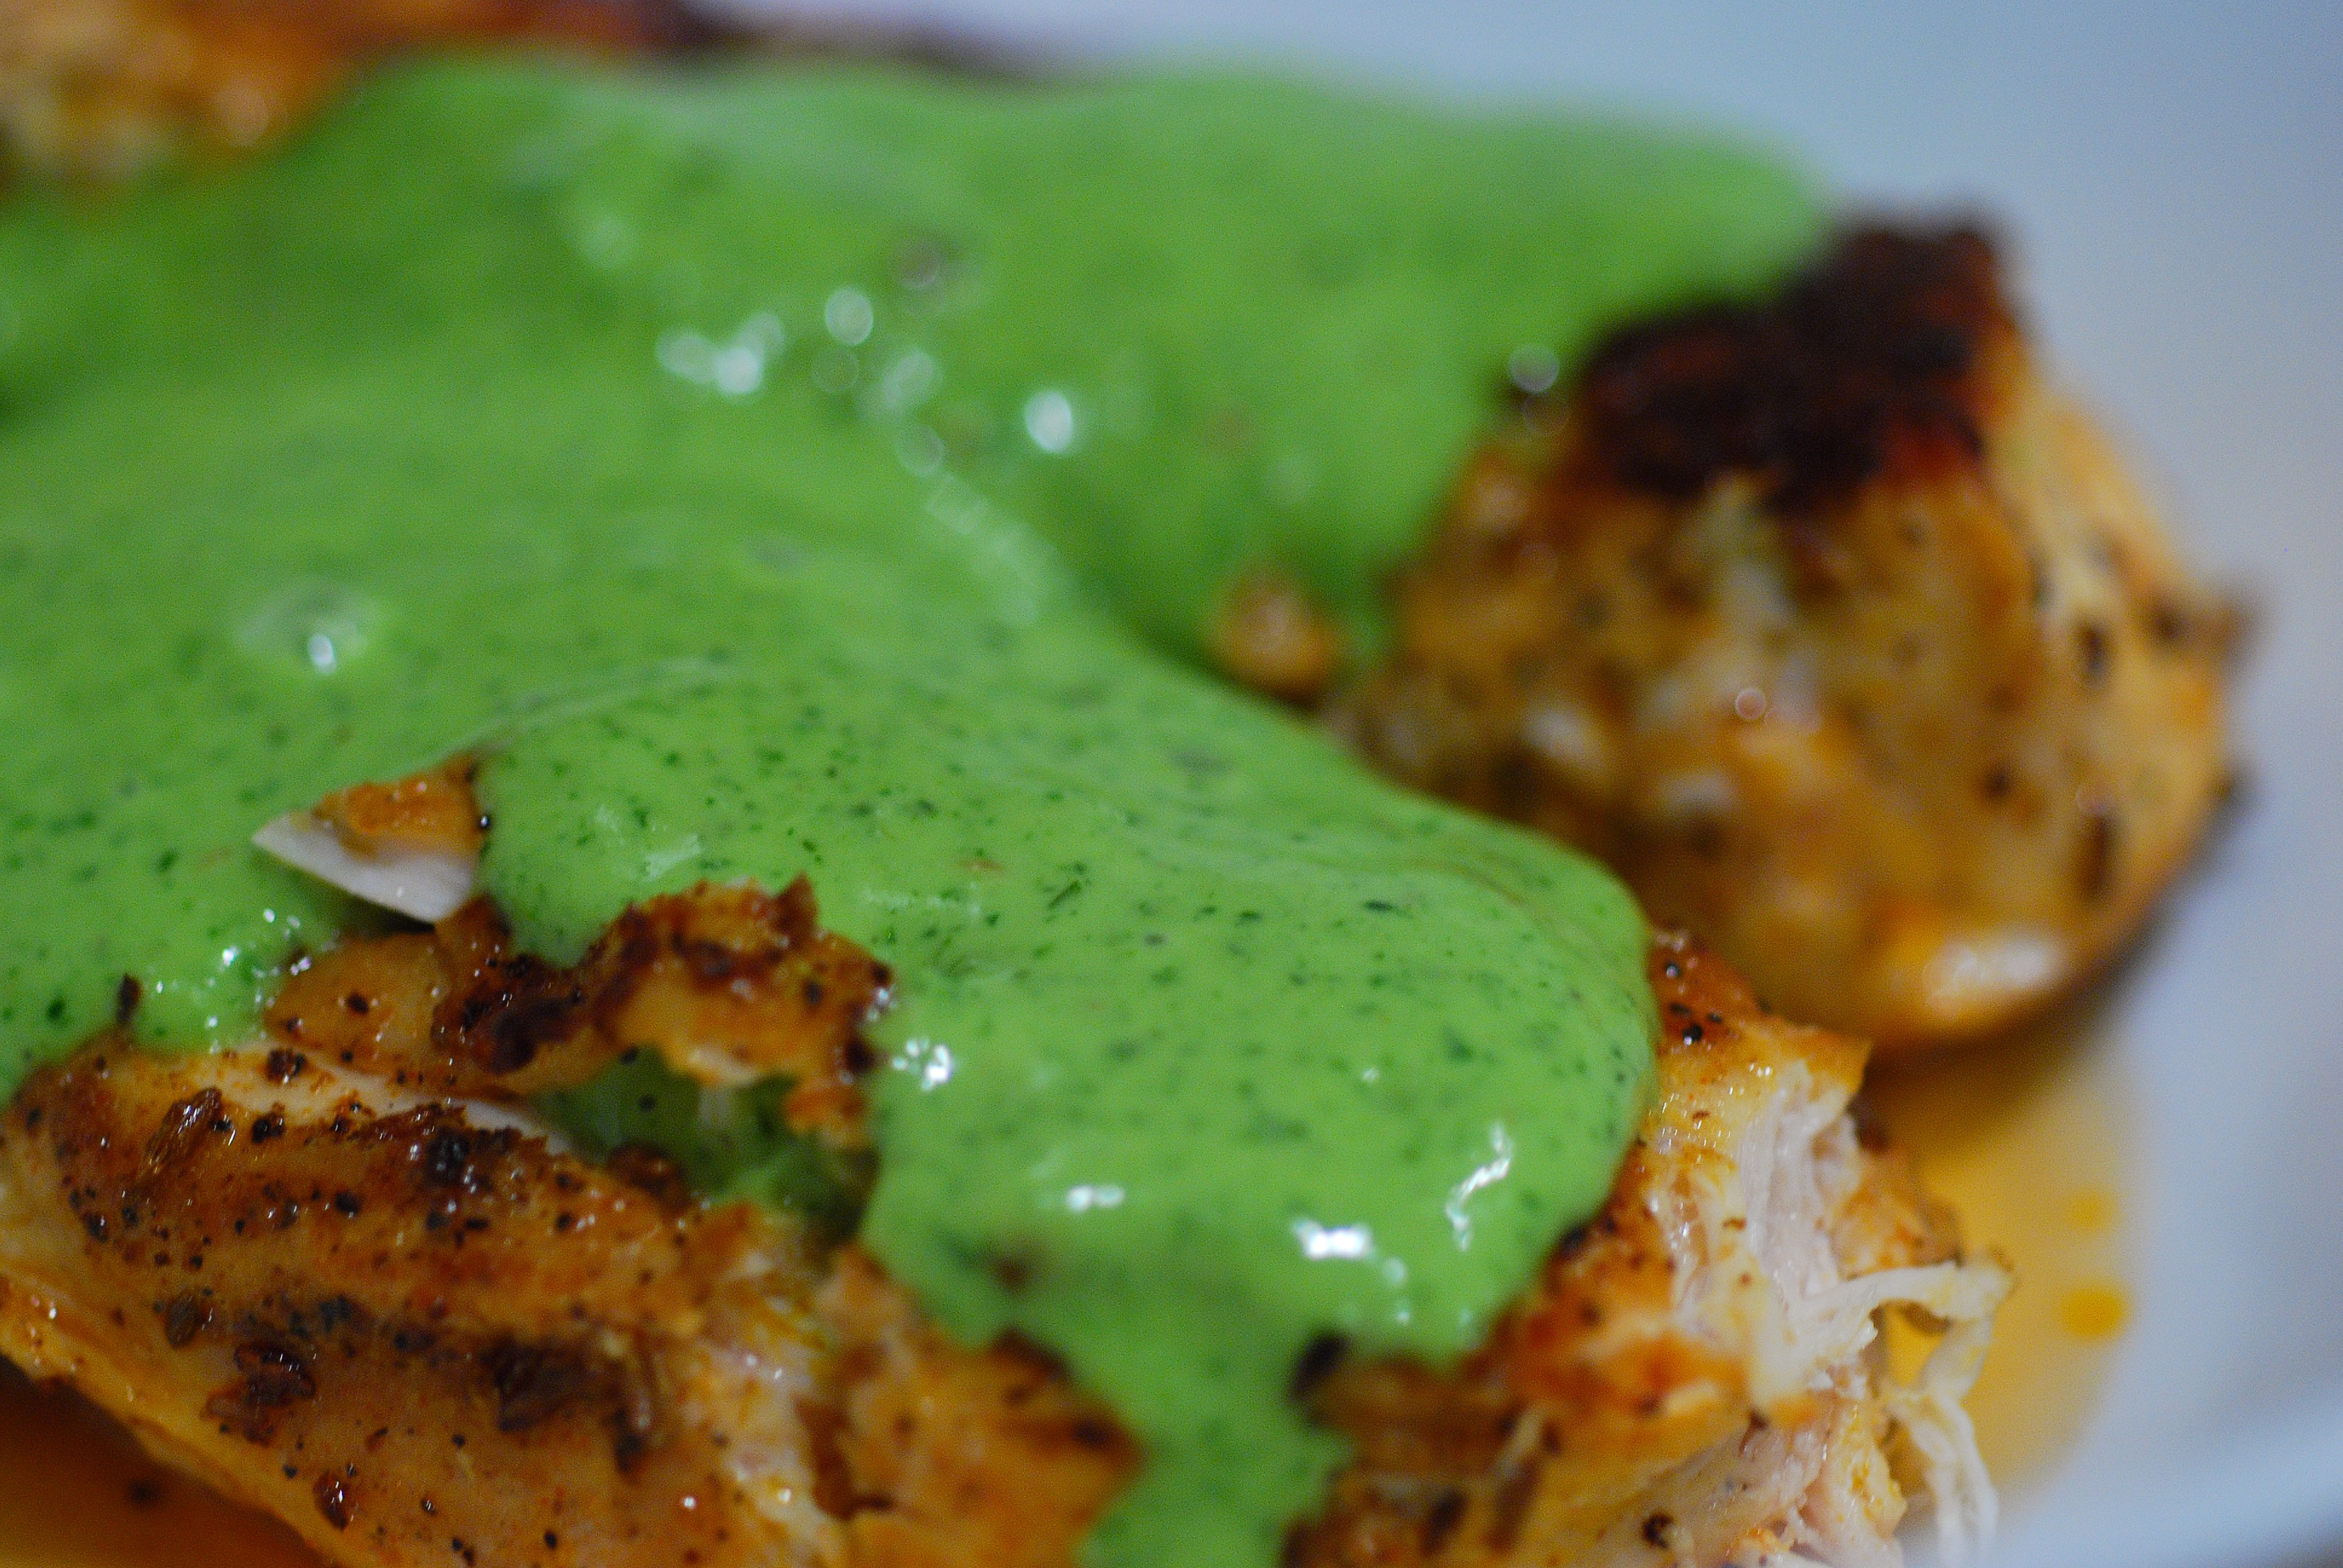 Victoire du brexit. Spanish_spice_rubbed_chicken_with_parsley_mint_sauce